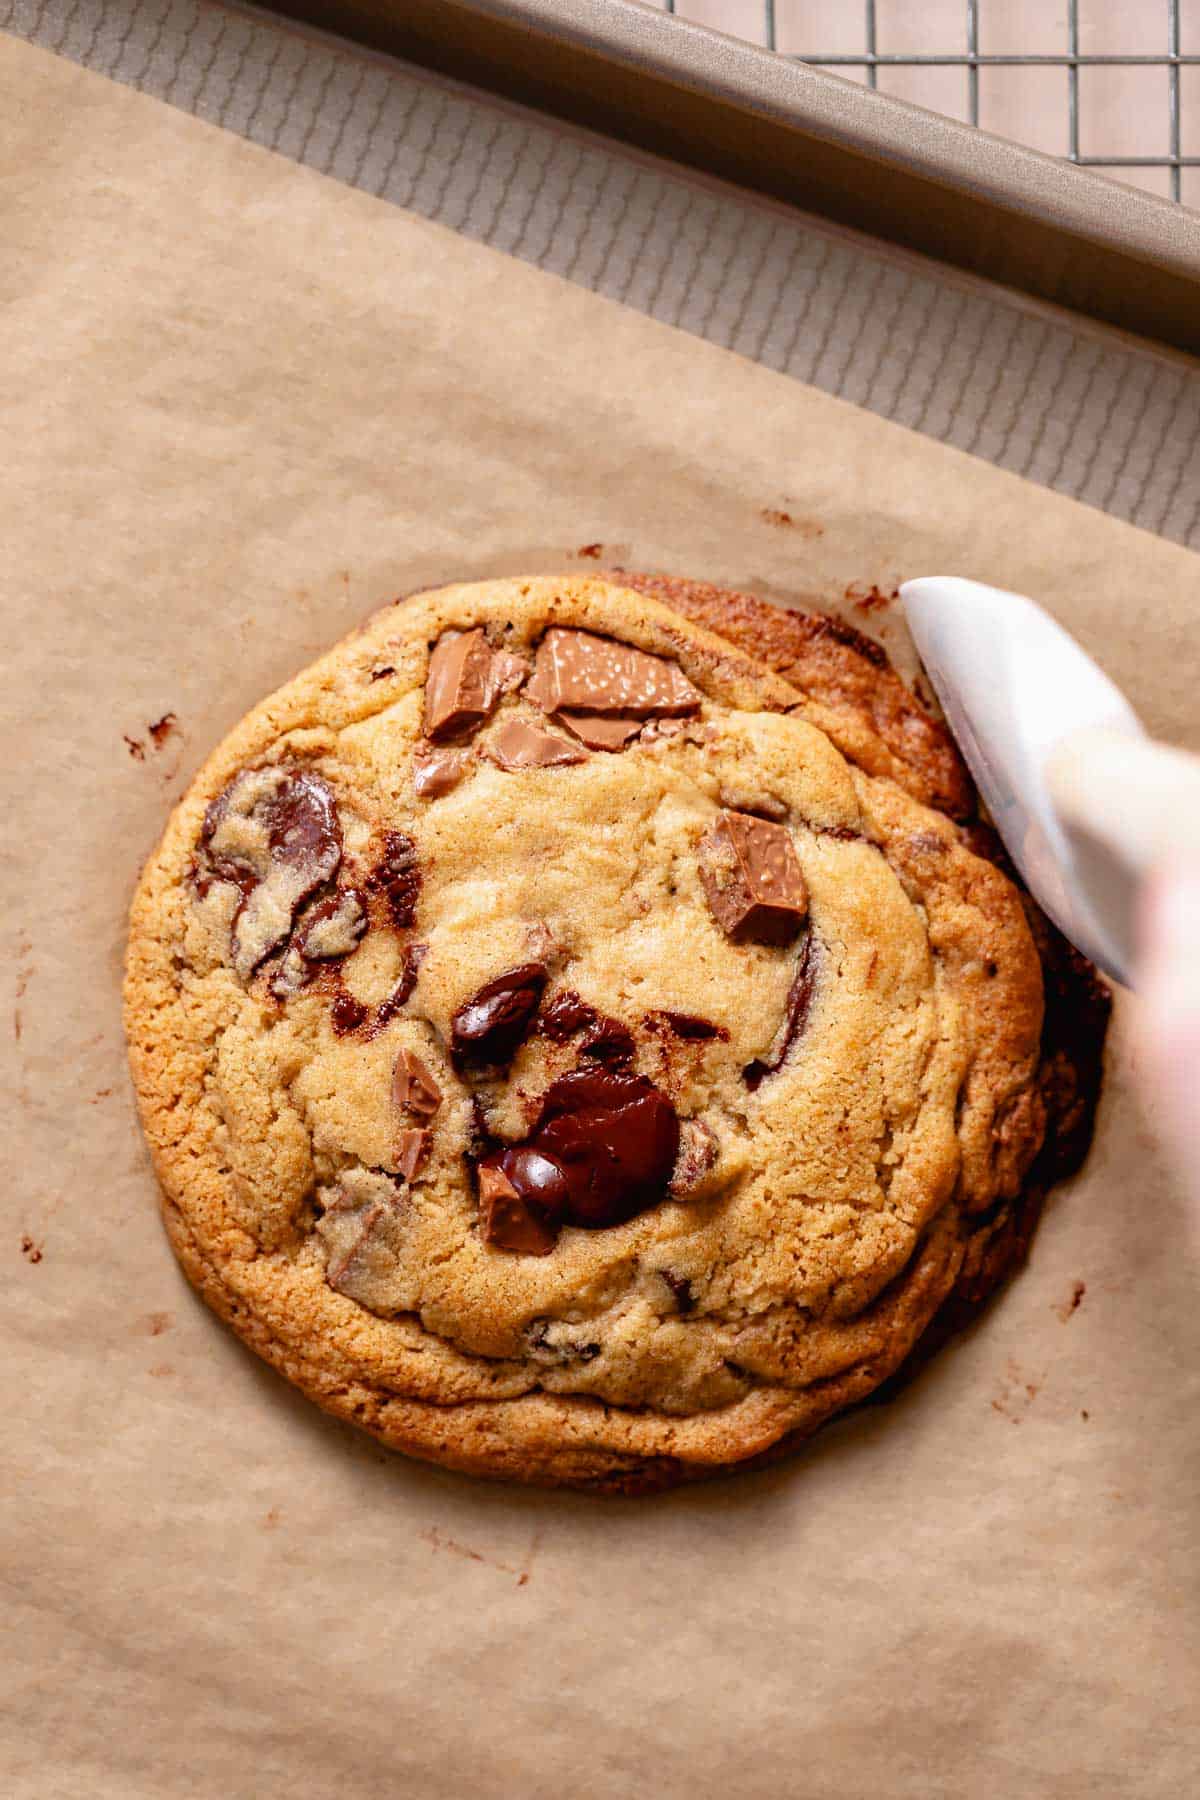 A spatula scooting in the edges of a cookie after baking to make it perfectly round.